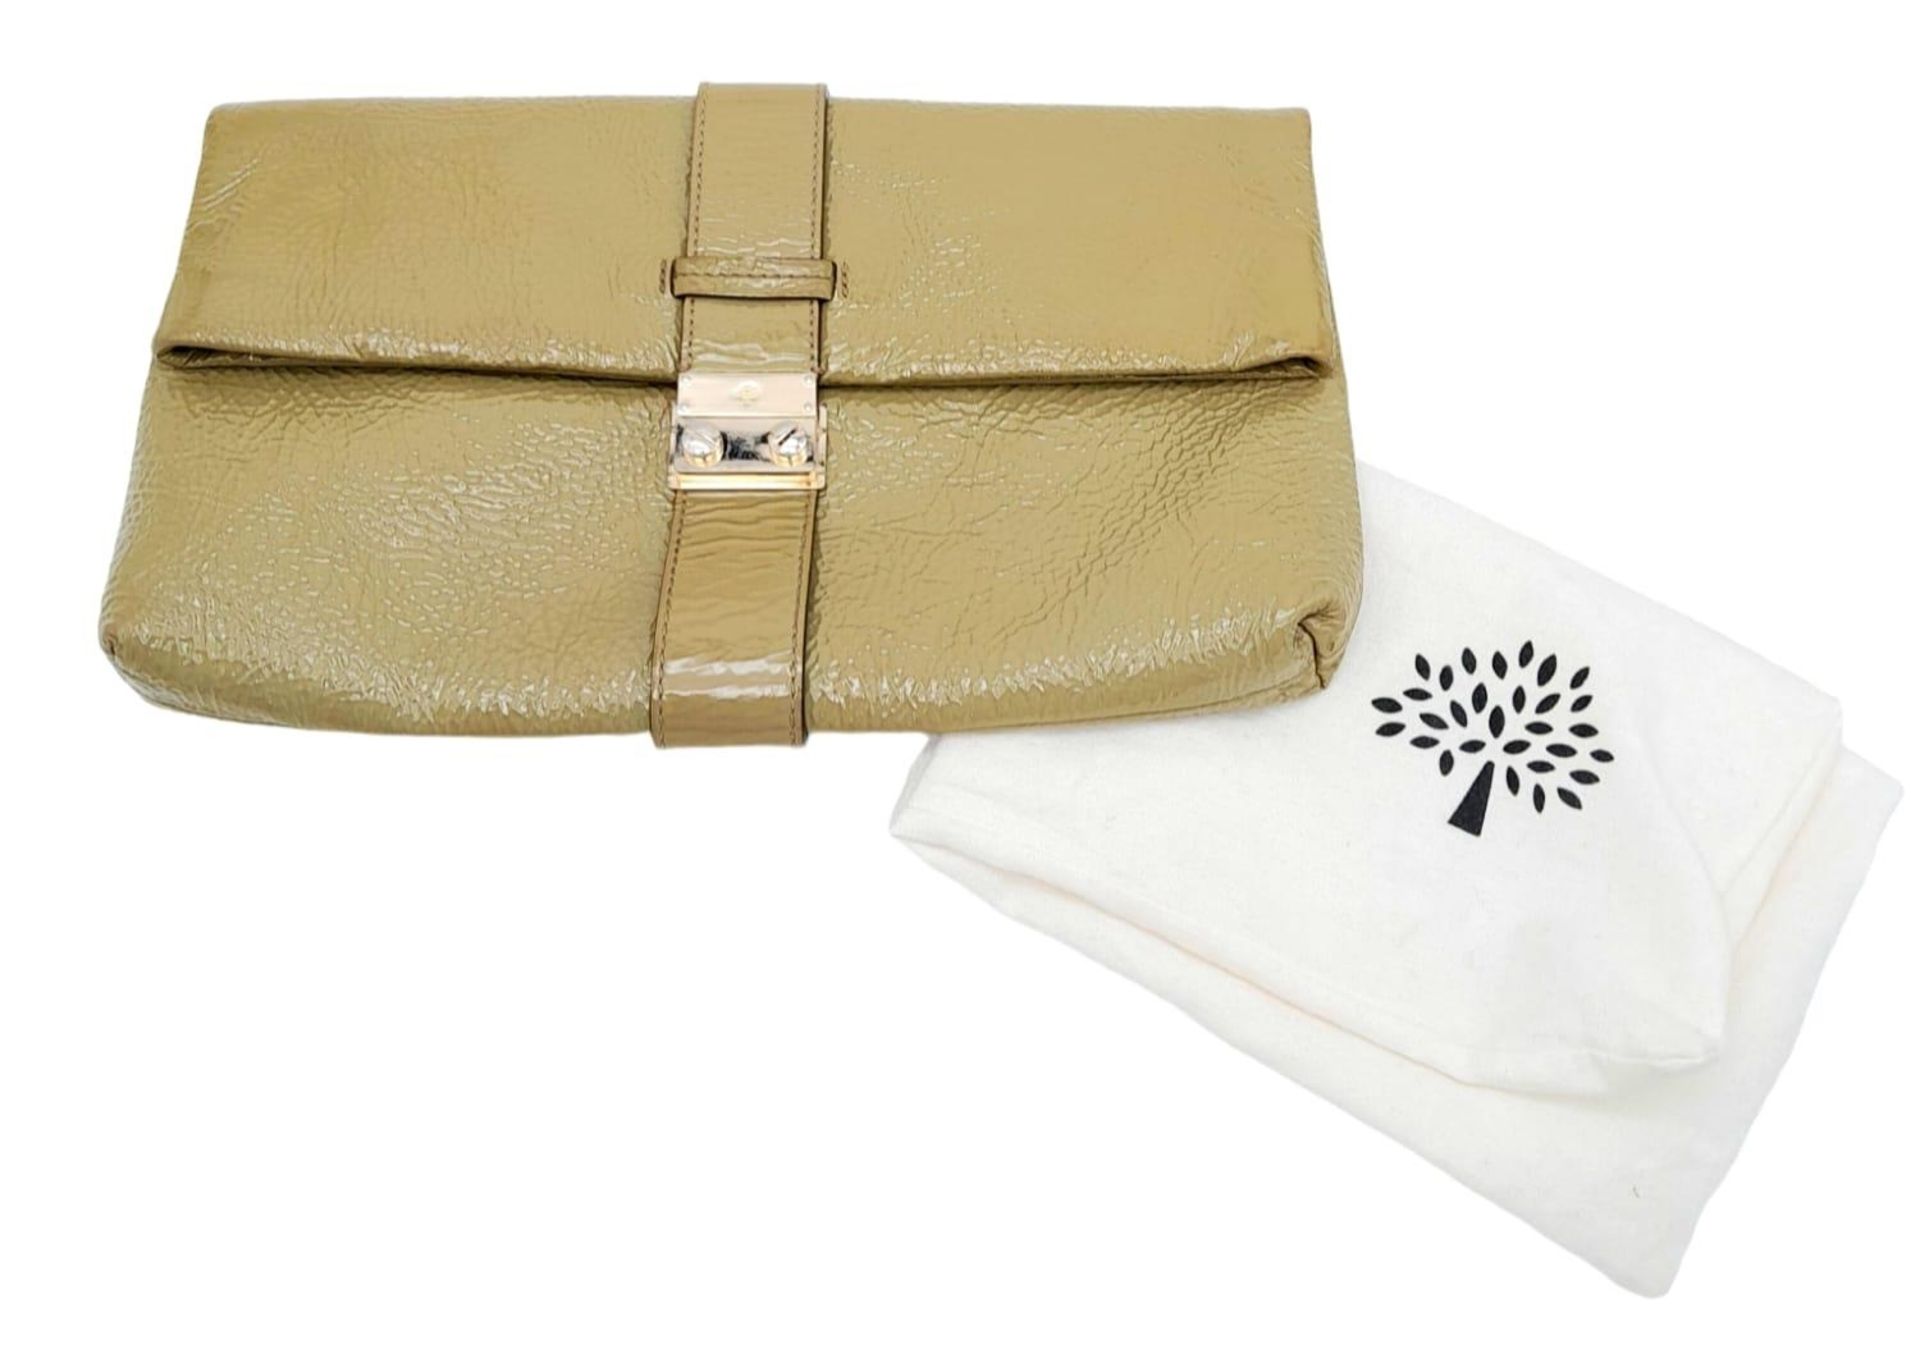 A Mulberry Harriet Khaki Leather Clutch Bag. Spongy patent leather exterior with gold-tone hardware, - Image 10 of 10